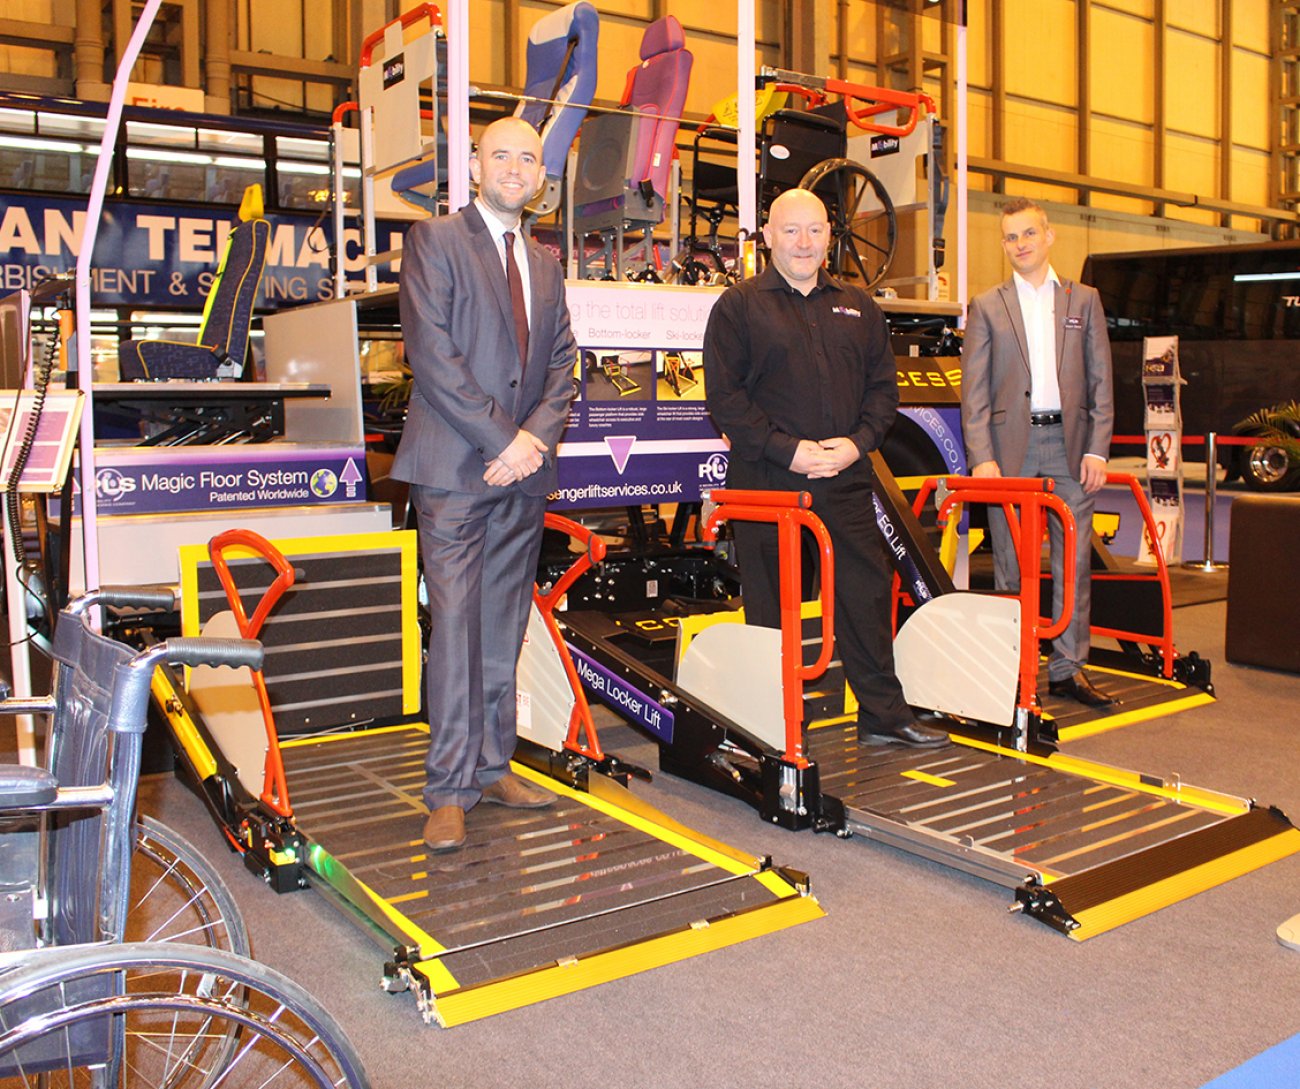 PLS, A MOBILITY NETWORKS COMPANY, TO LAUNCH WIDEST RANGE OF NEW PCV WHEELCHAIR LIFTS AND RAMPS AT EUROBUS EXPO 